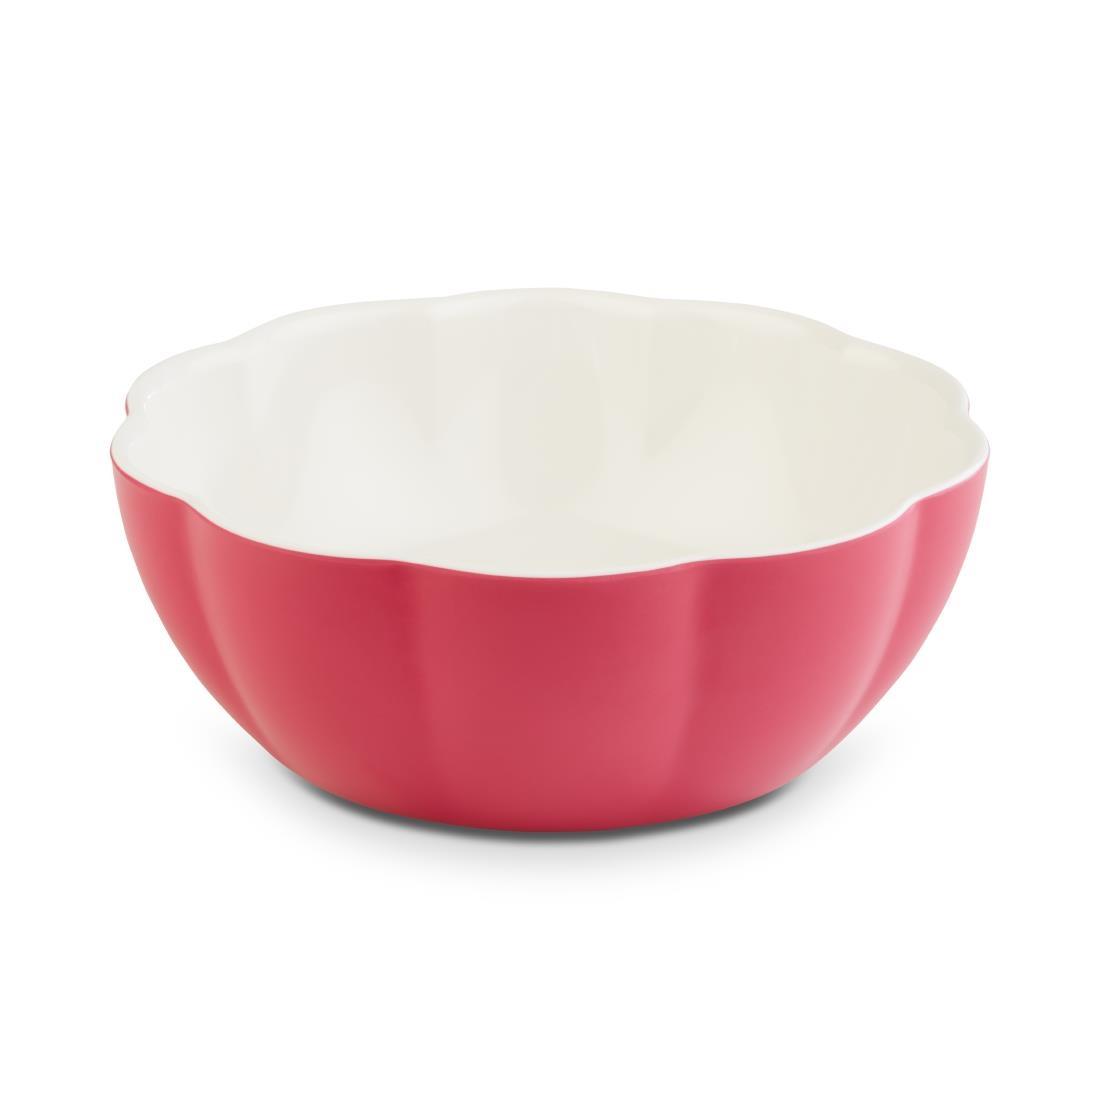 APS+ Lotus Bowl Red and White 200mm - Each - DT788 - 1